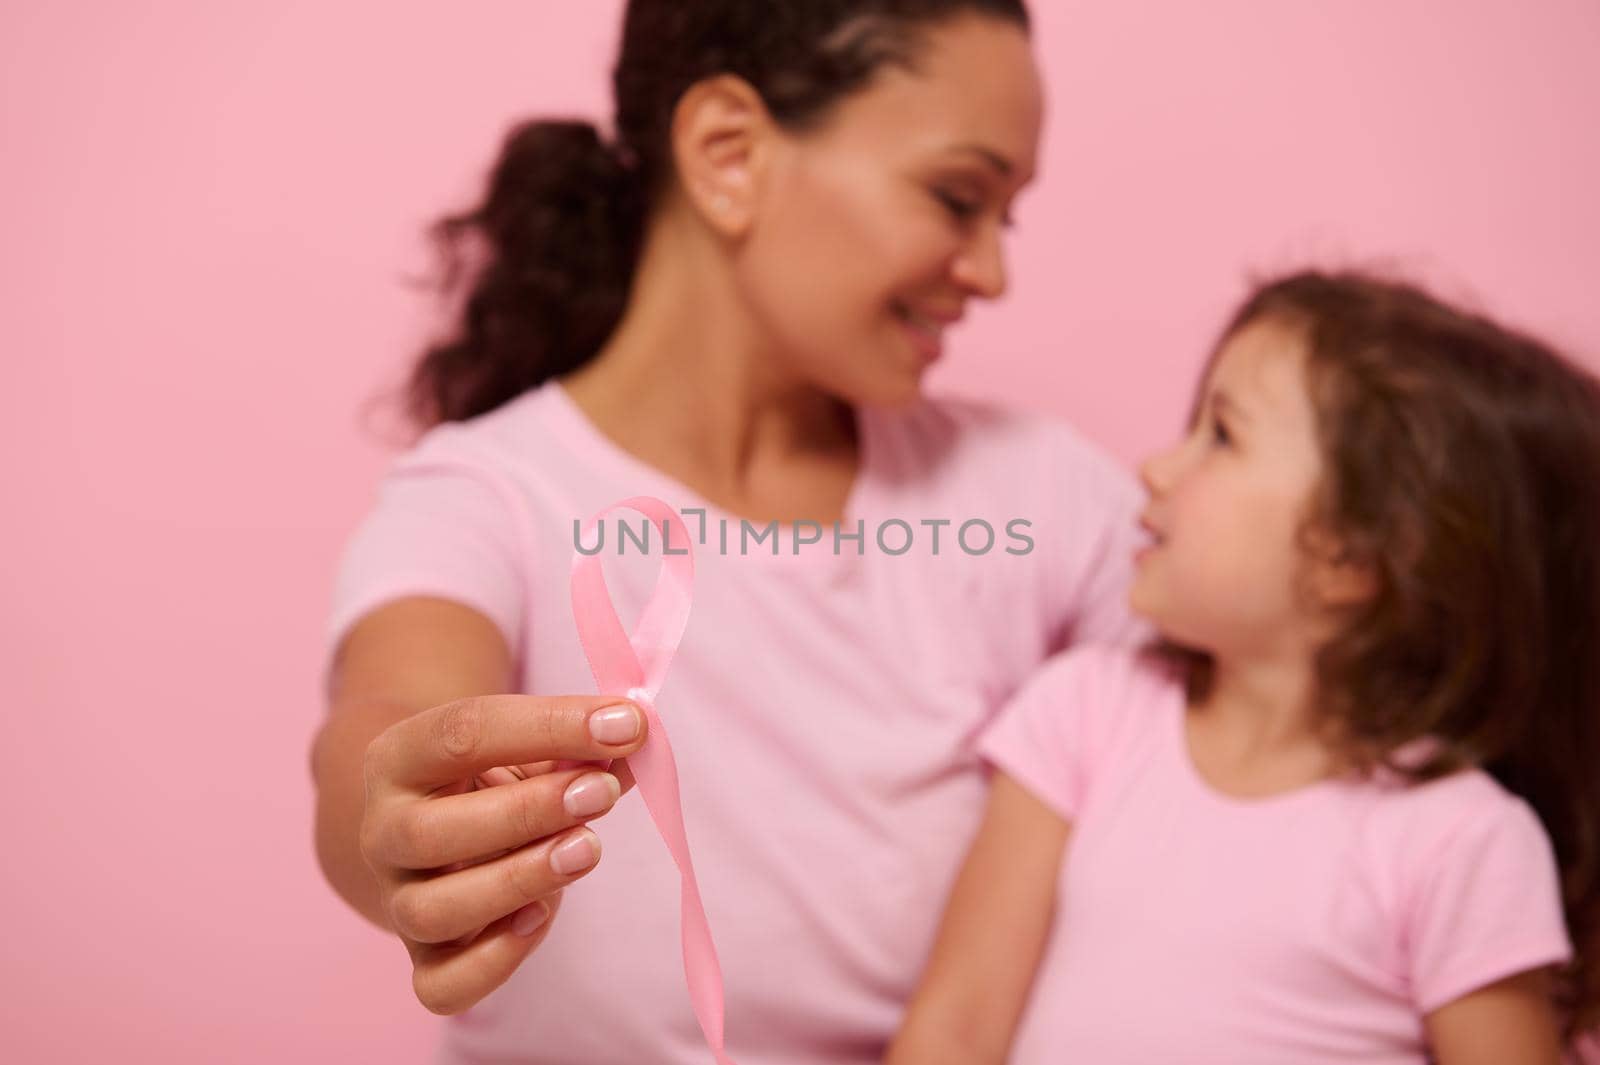 Focus on pink ribbon in the hands of blurred woman and girl wearing pink ribbons and t-shirts - banner for Breast Cancer Awareness Day. Motivational slogan to fight cancer. Medical concept, copy space by artgf